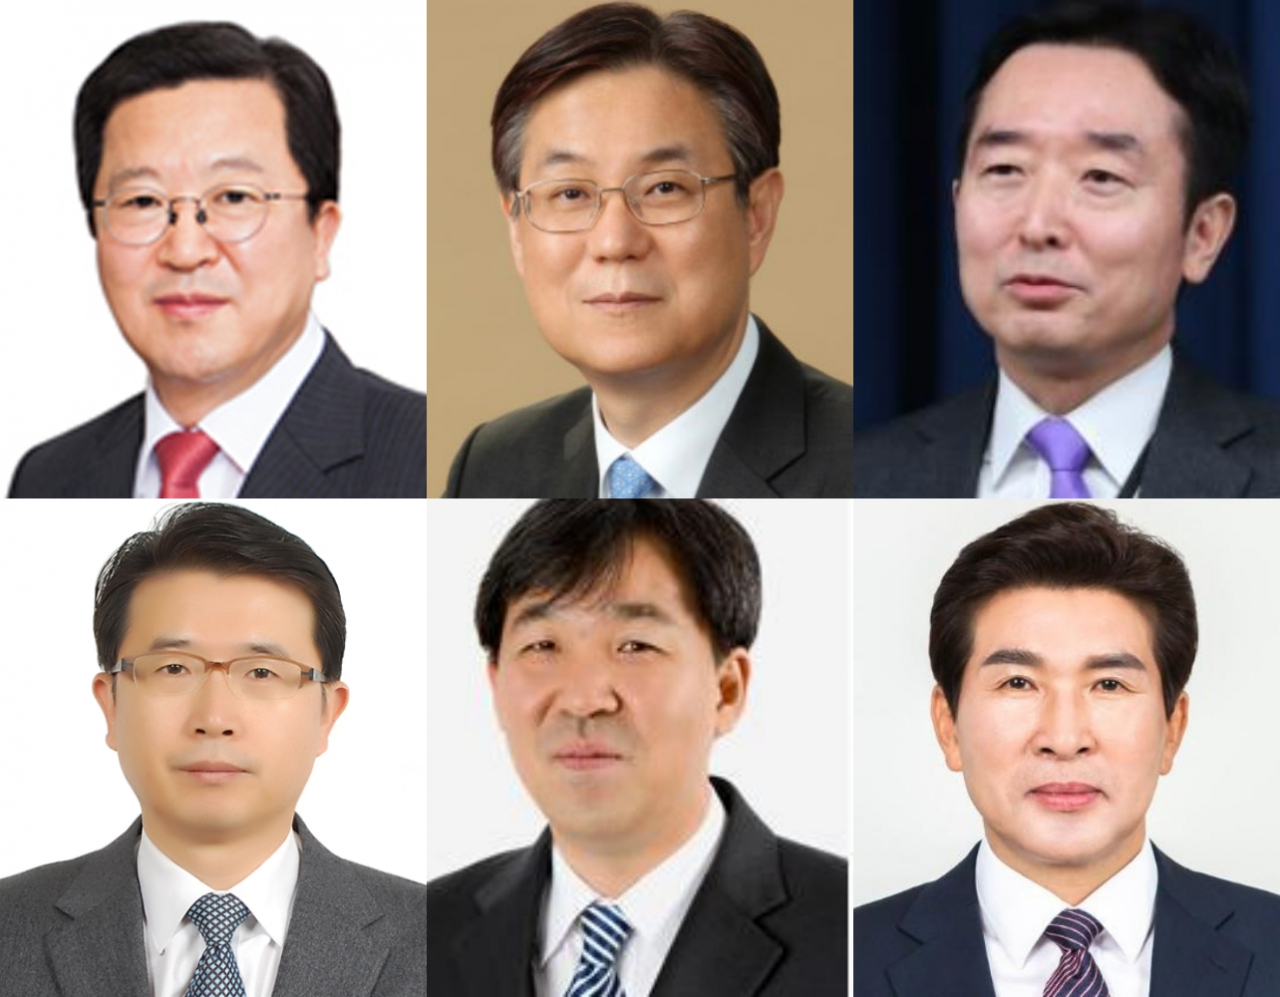 From top left, clockwise: Park, Chun-sup, nominee of senior secretary for economic affairs; Lee Kwan-sup, nominee of chief presidential secretary for policy; Lee Do-woon, nominee of senior secretary for public relations; Hwang Sang-moo, nominee of senior secretary for civil society; Han O-sub, nominee for senior secretary for political affairs; and Jang Sang-yoon, nominee of senior secretary for social affairs. (Presidential office)